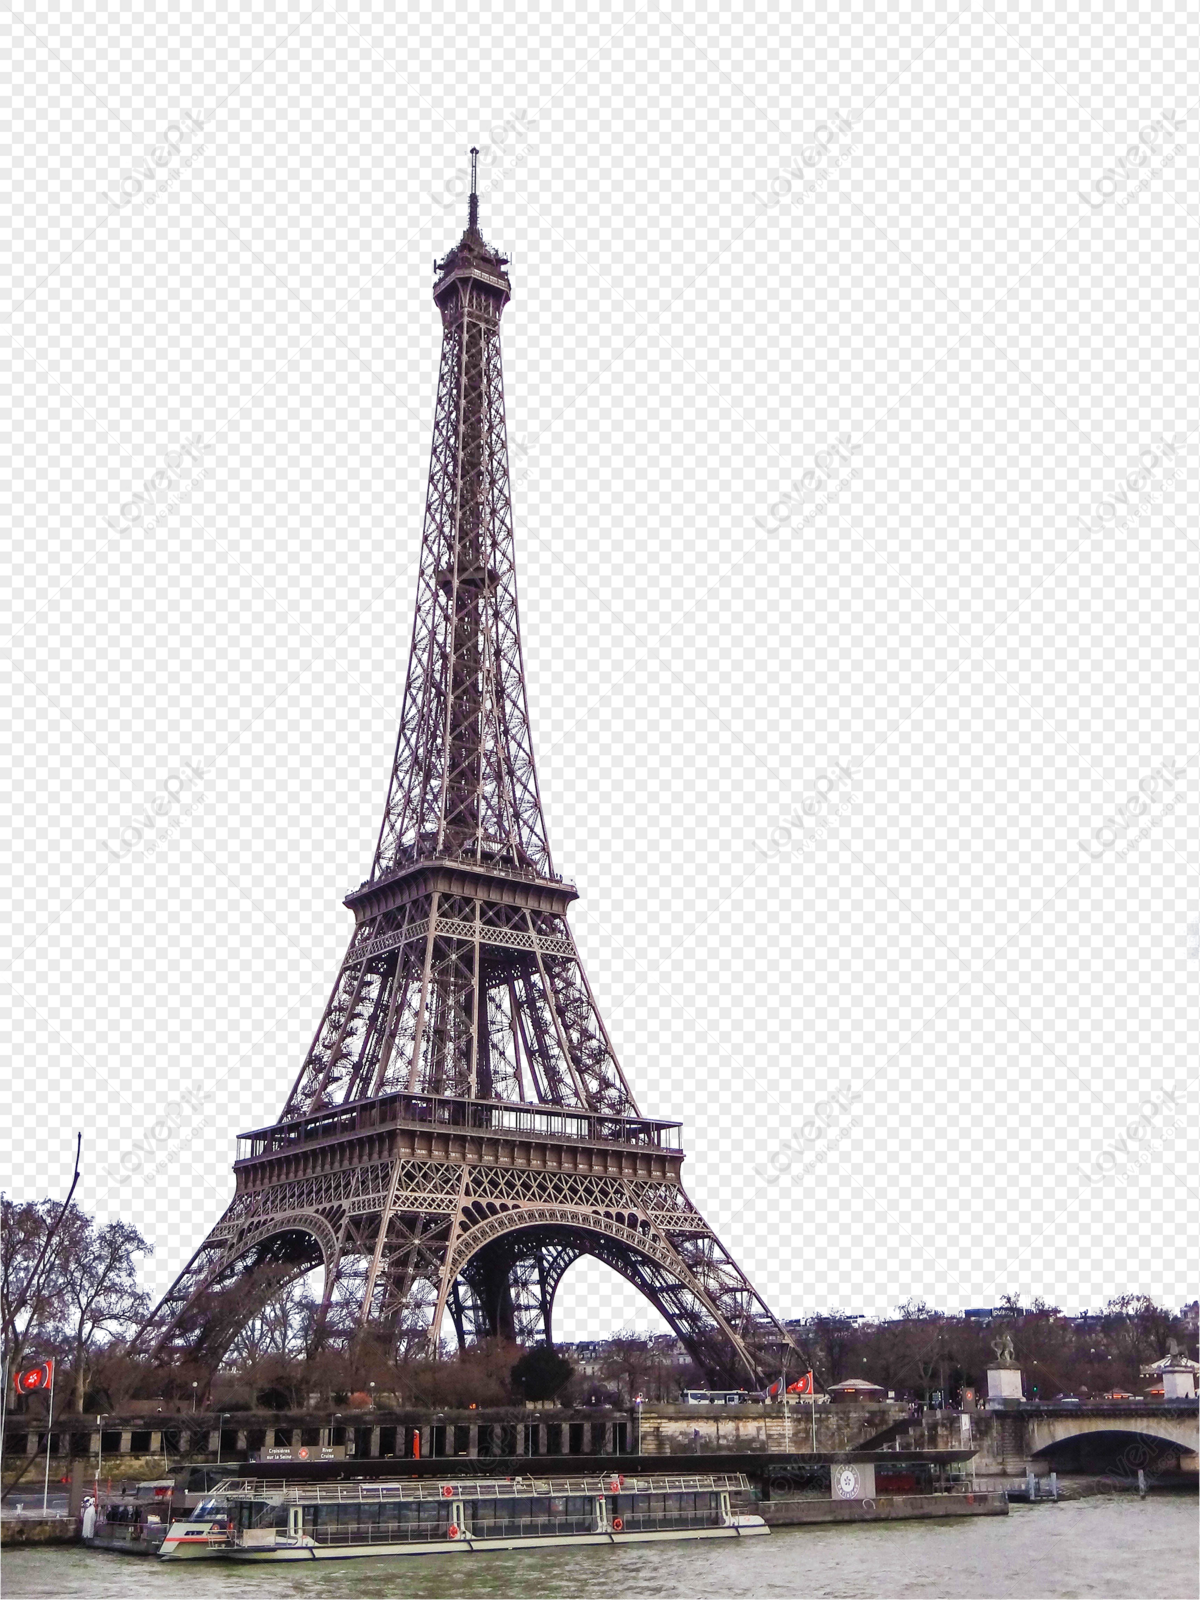 Eiffel Tower, building, material, scenery png image